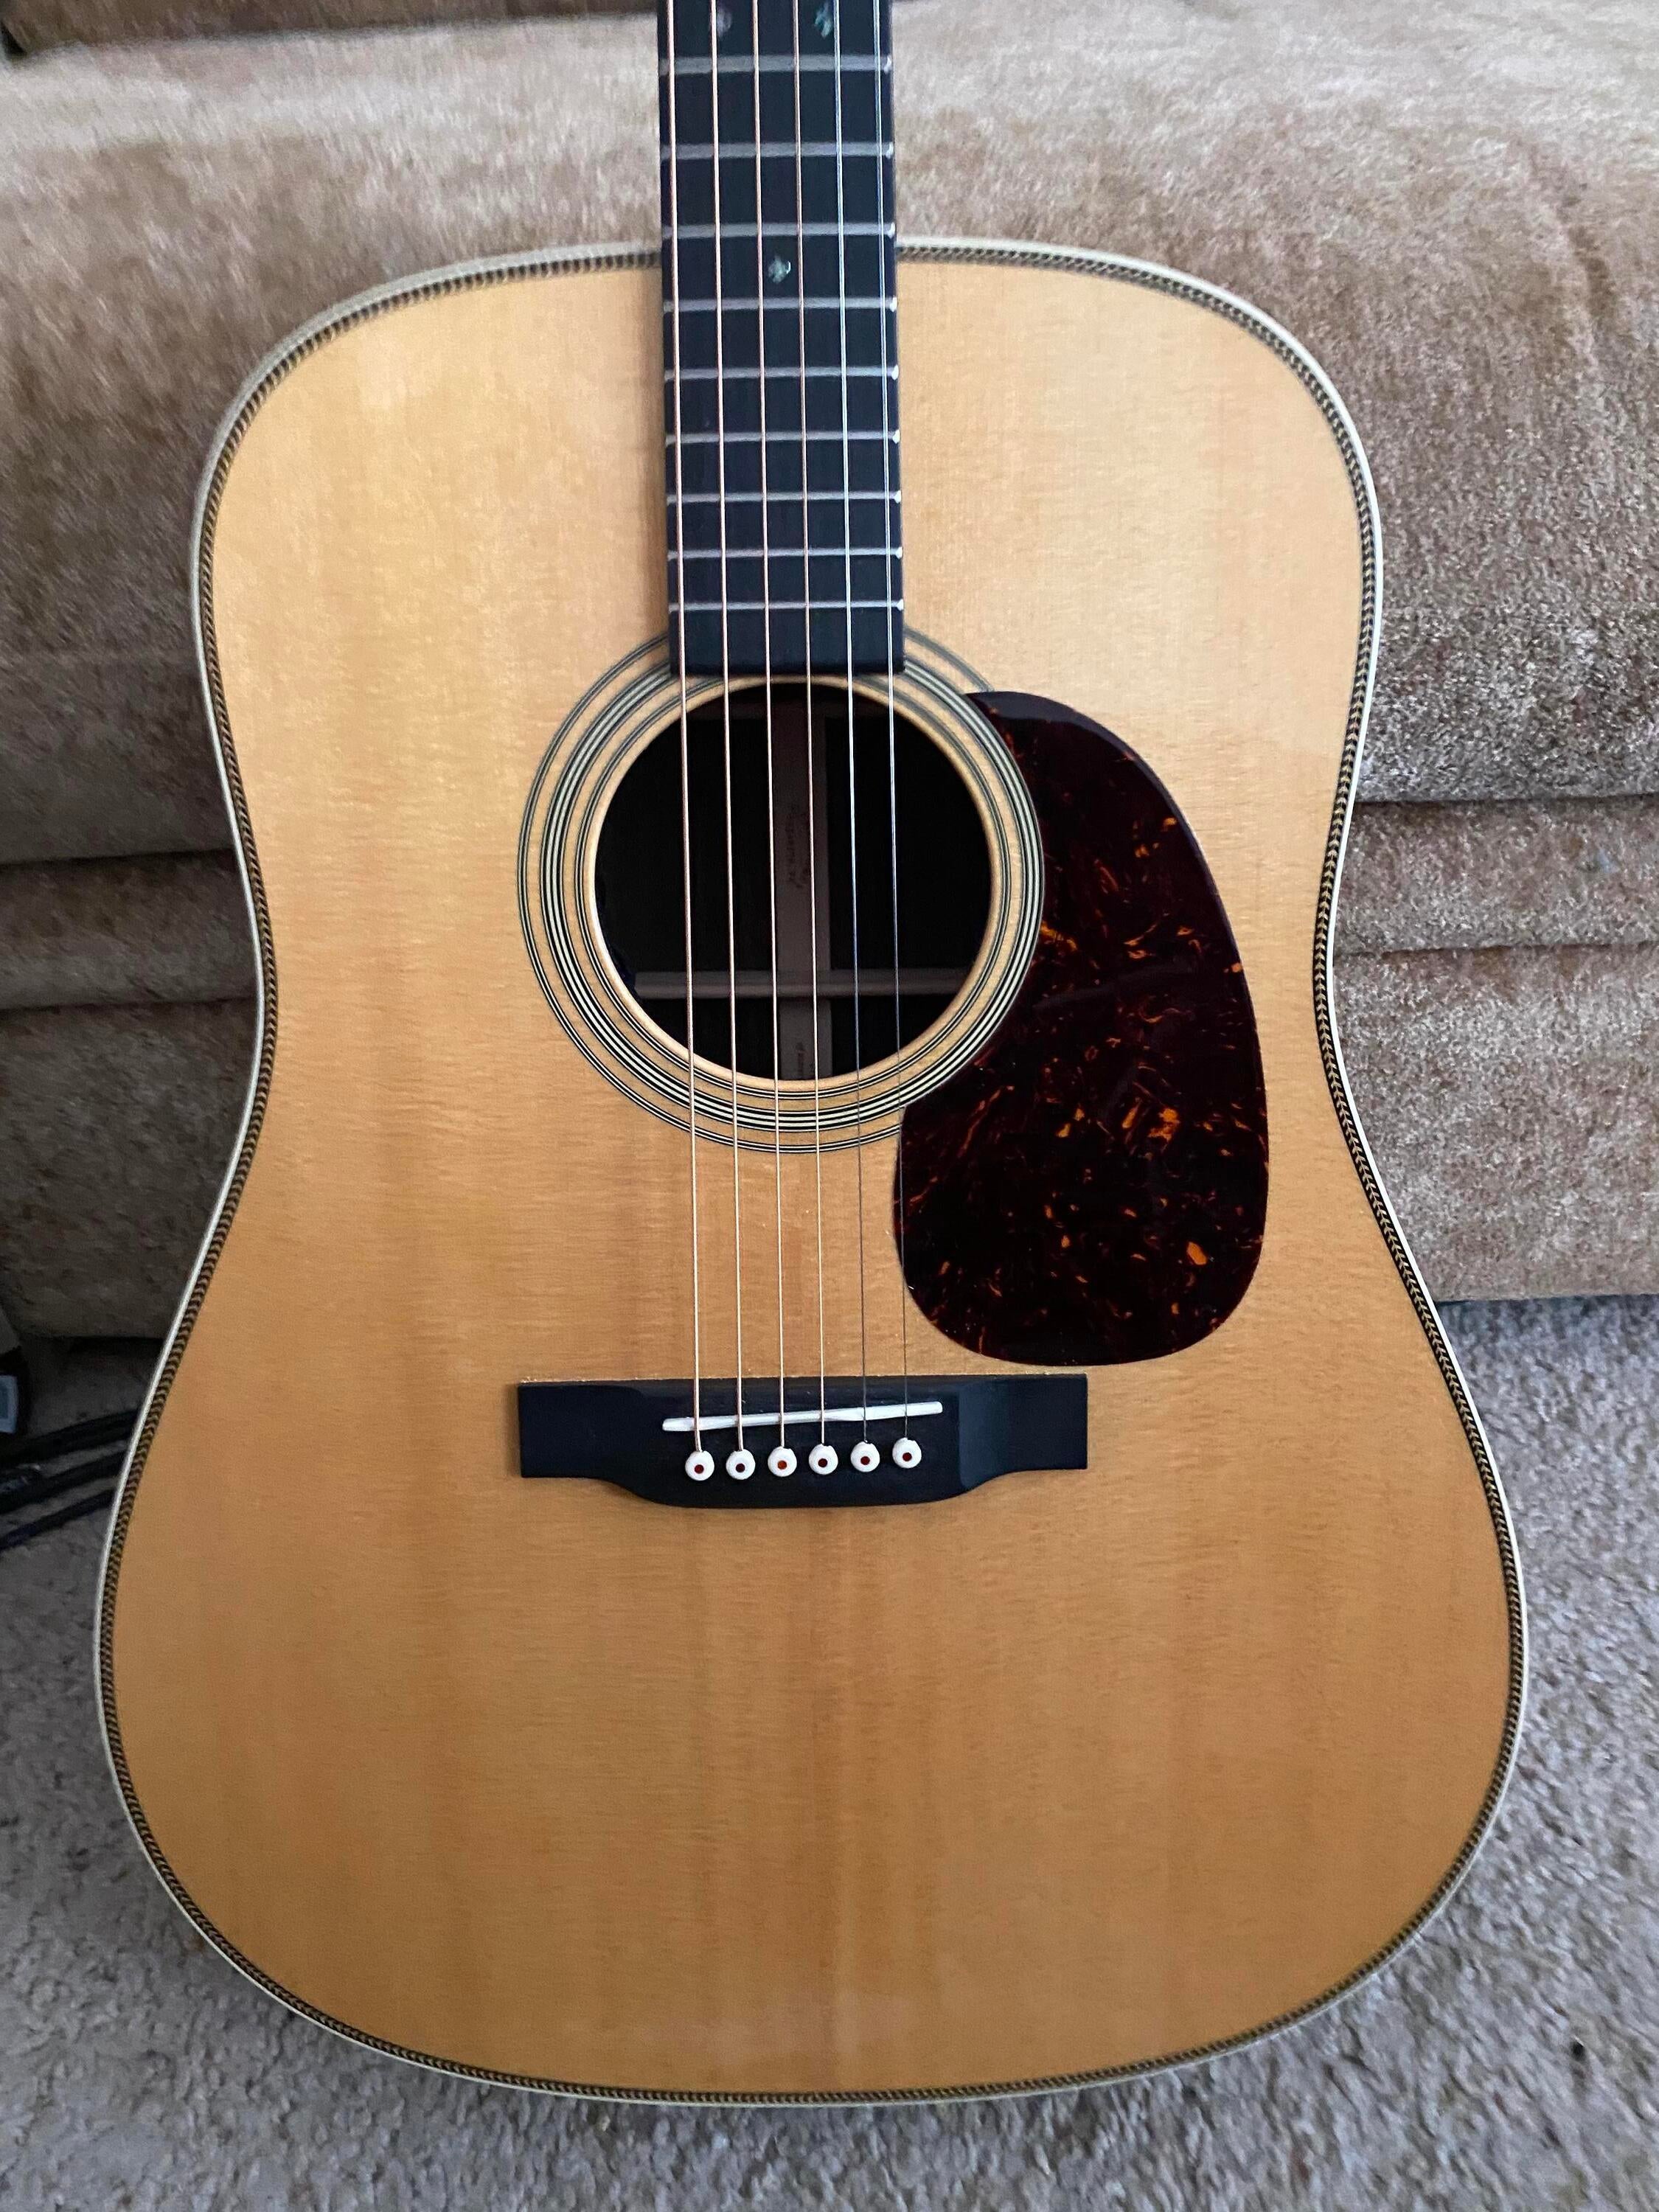 Used Martin HD-28E Acoustic-electric Guitar - Sweetwater's Gear